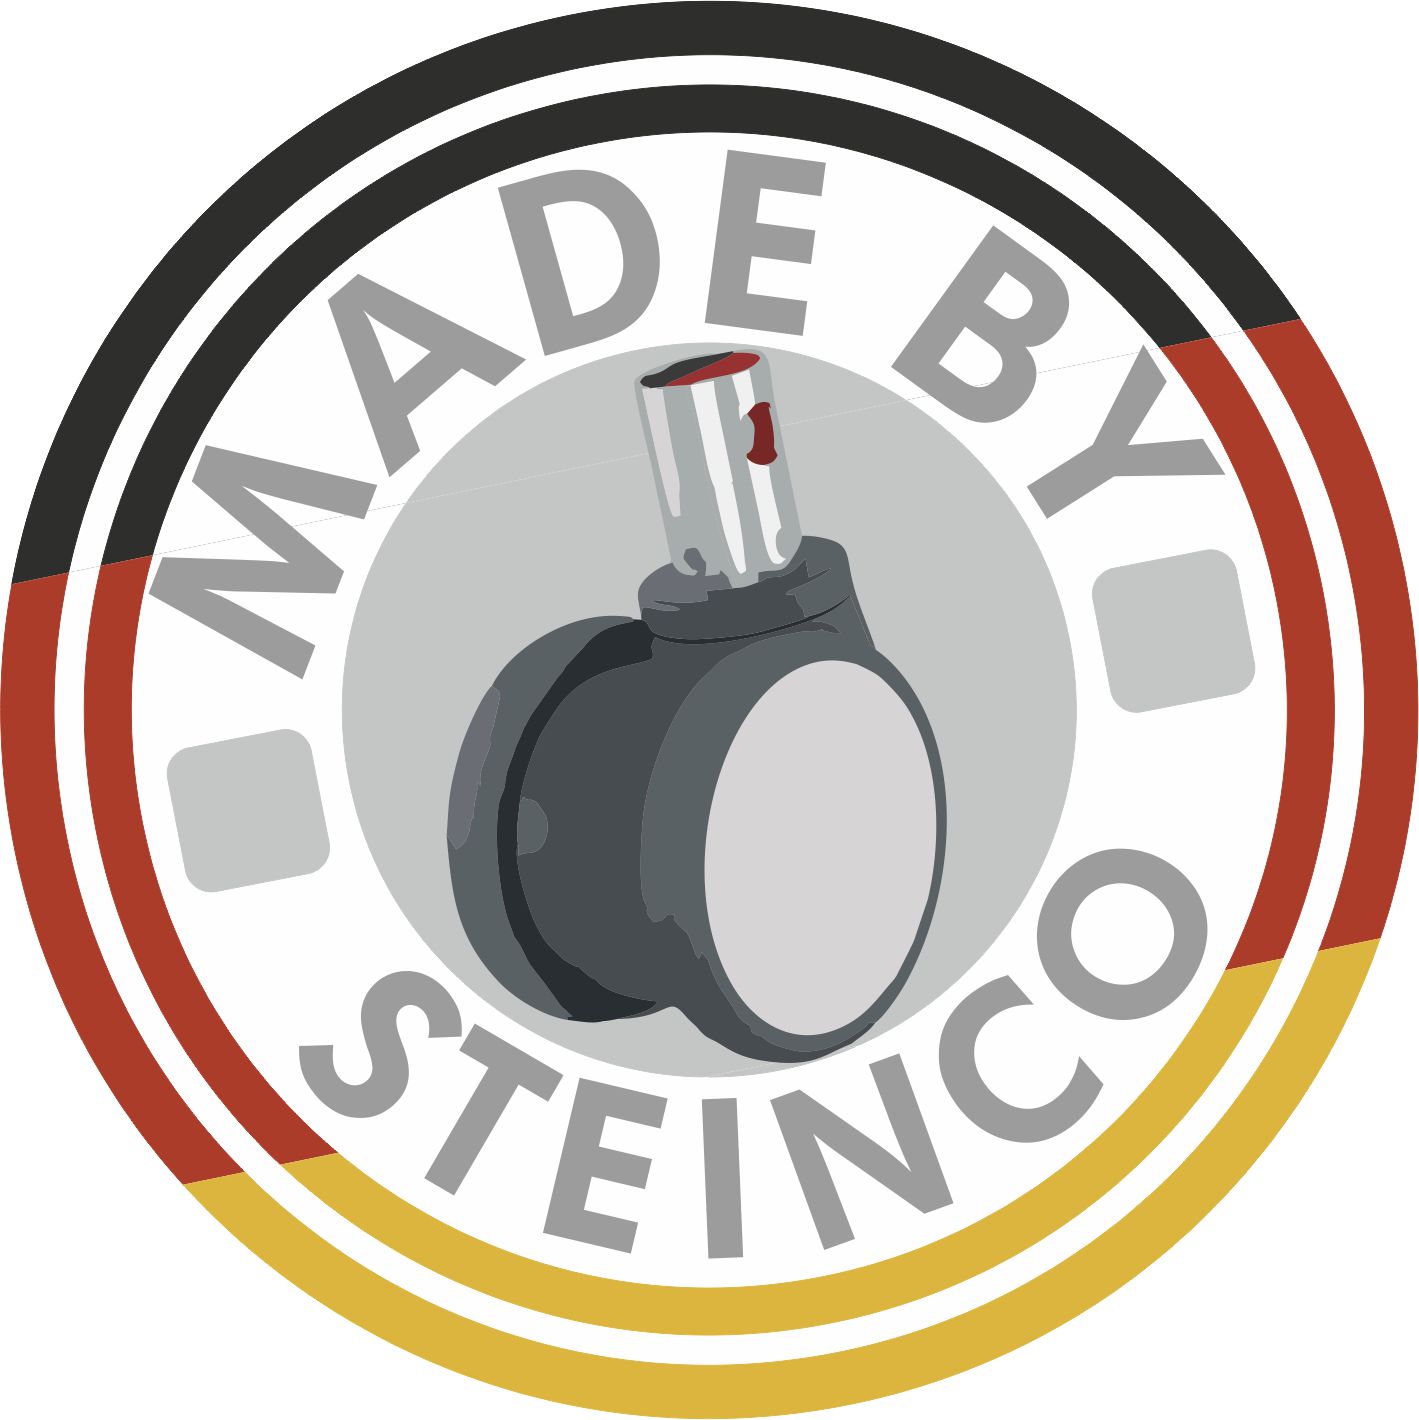 [Translate to Russisch:] Rollen und Räder - Made by STEINCO and Made in Germany